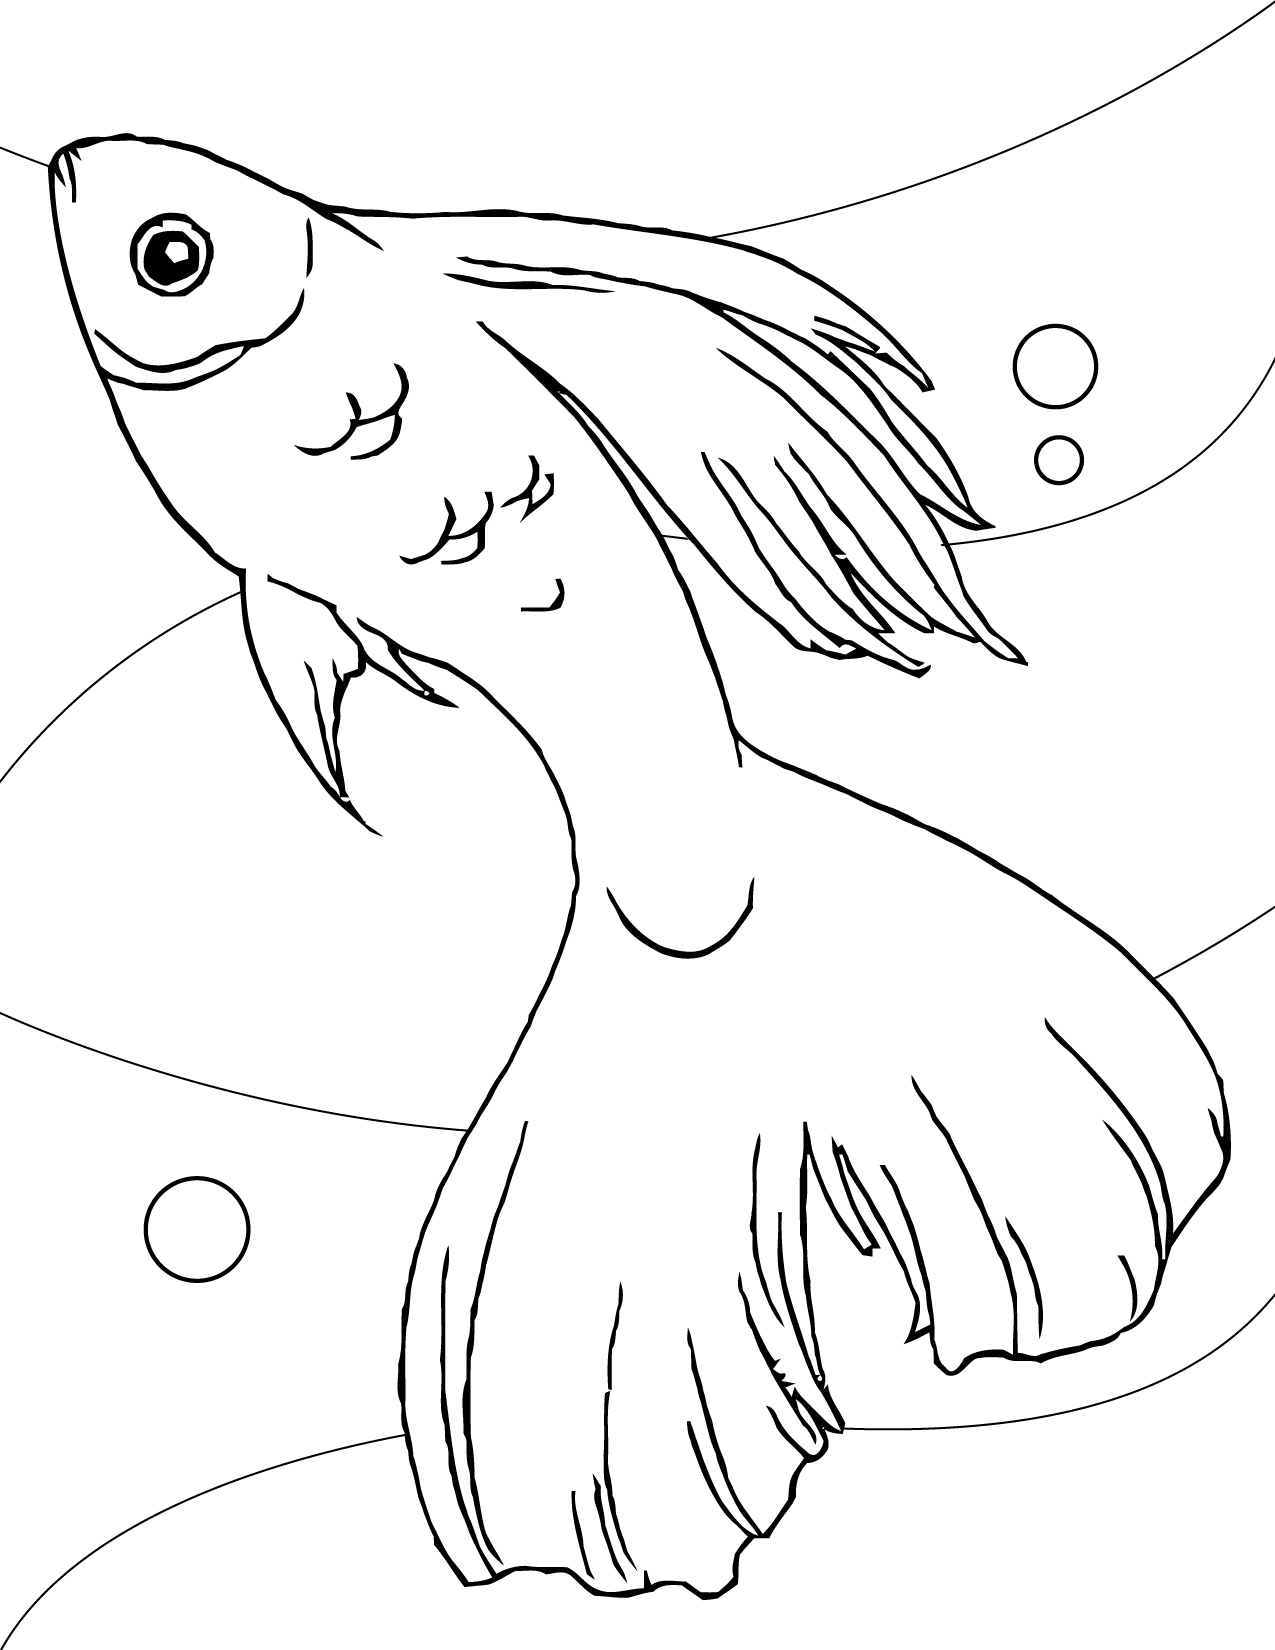 Betta fish coloring pages